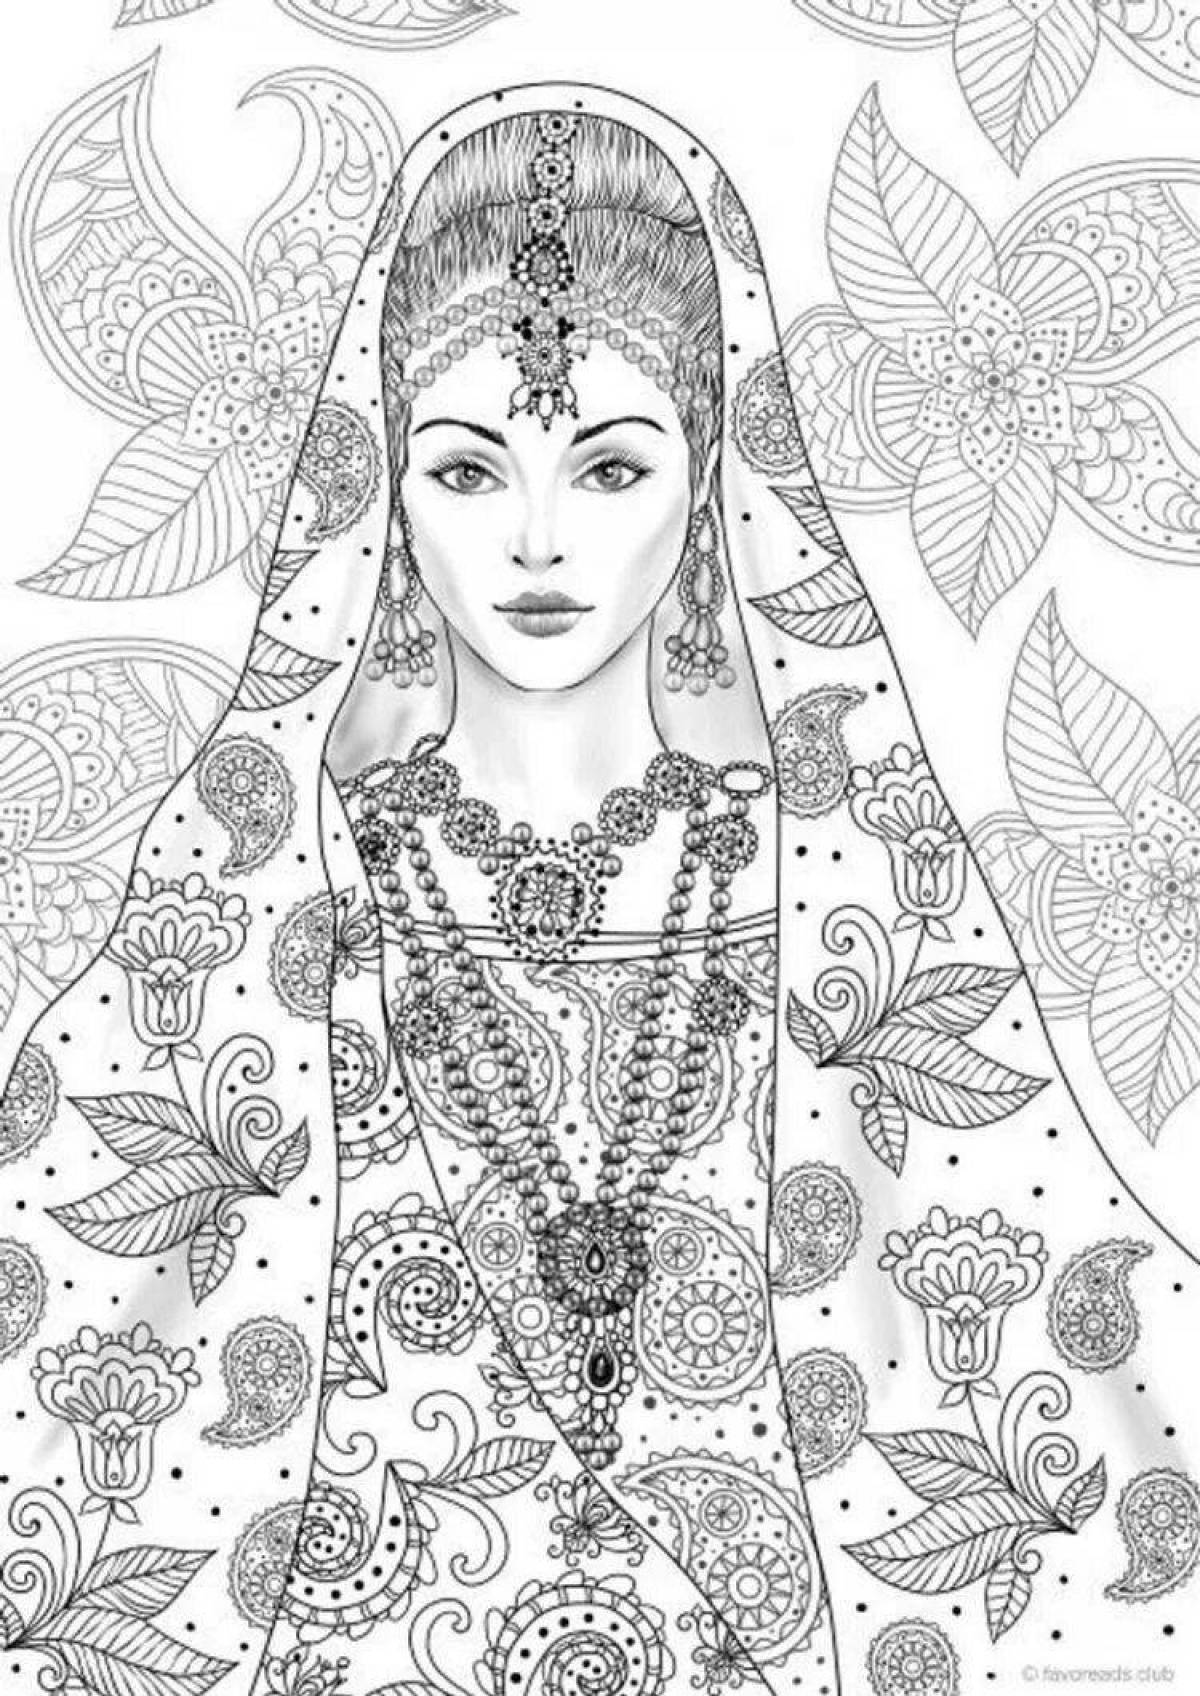 Charming Indian coloring book